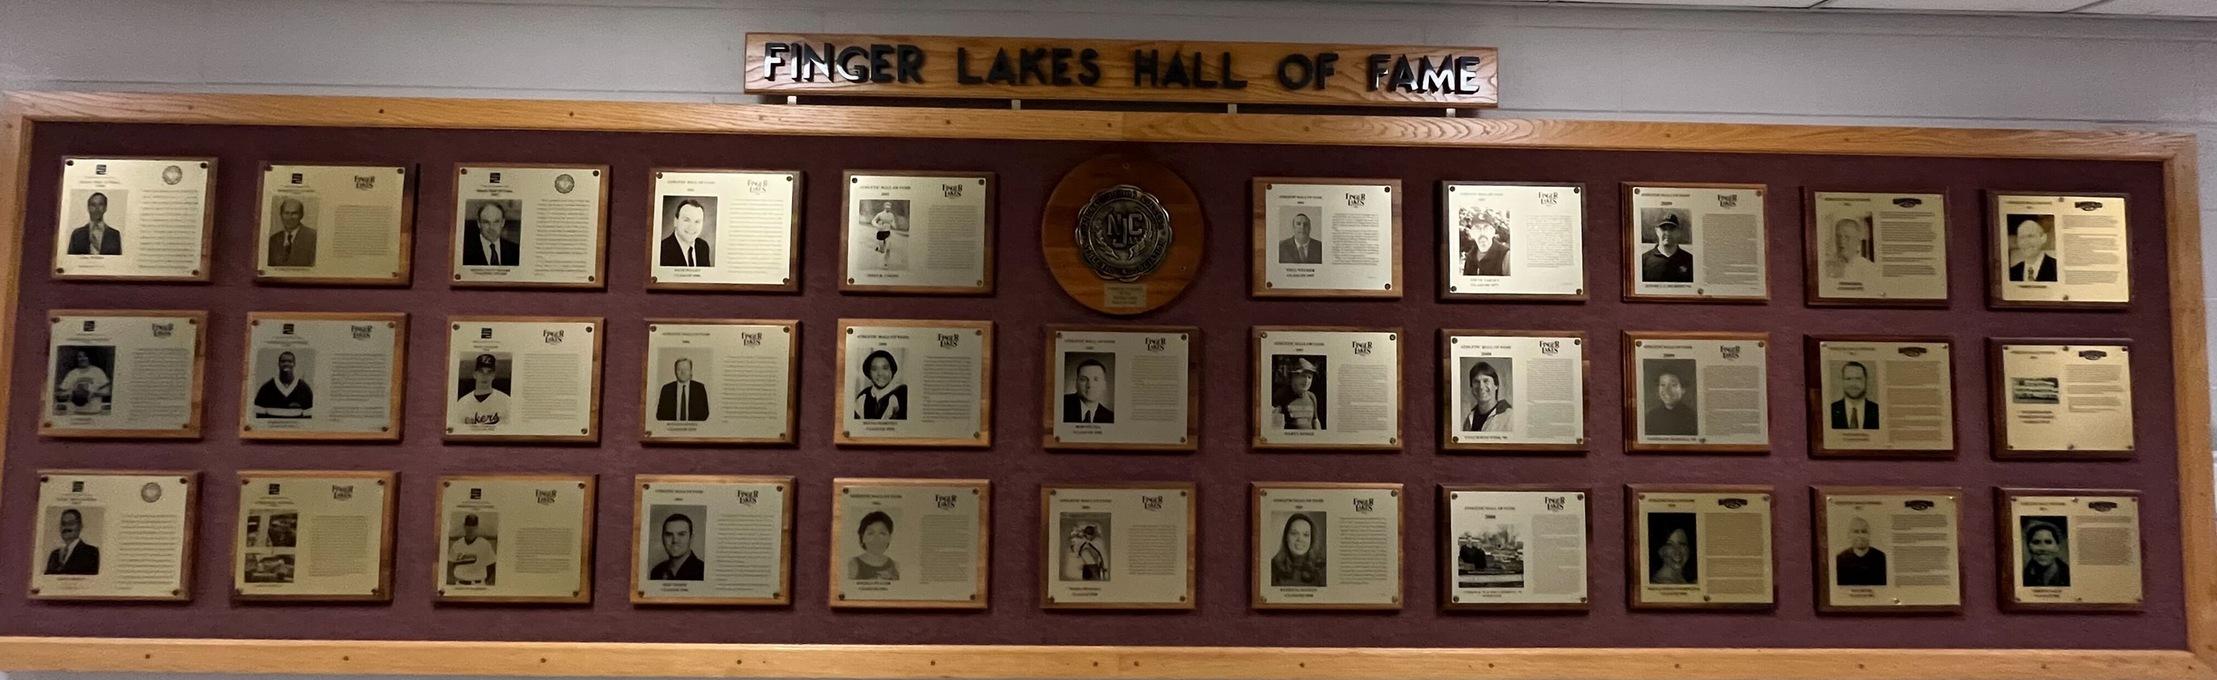 Finger Lakes Community College Hall of Fame